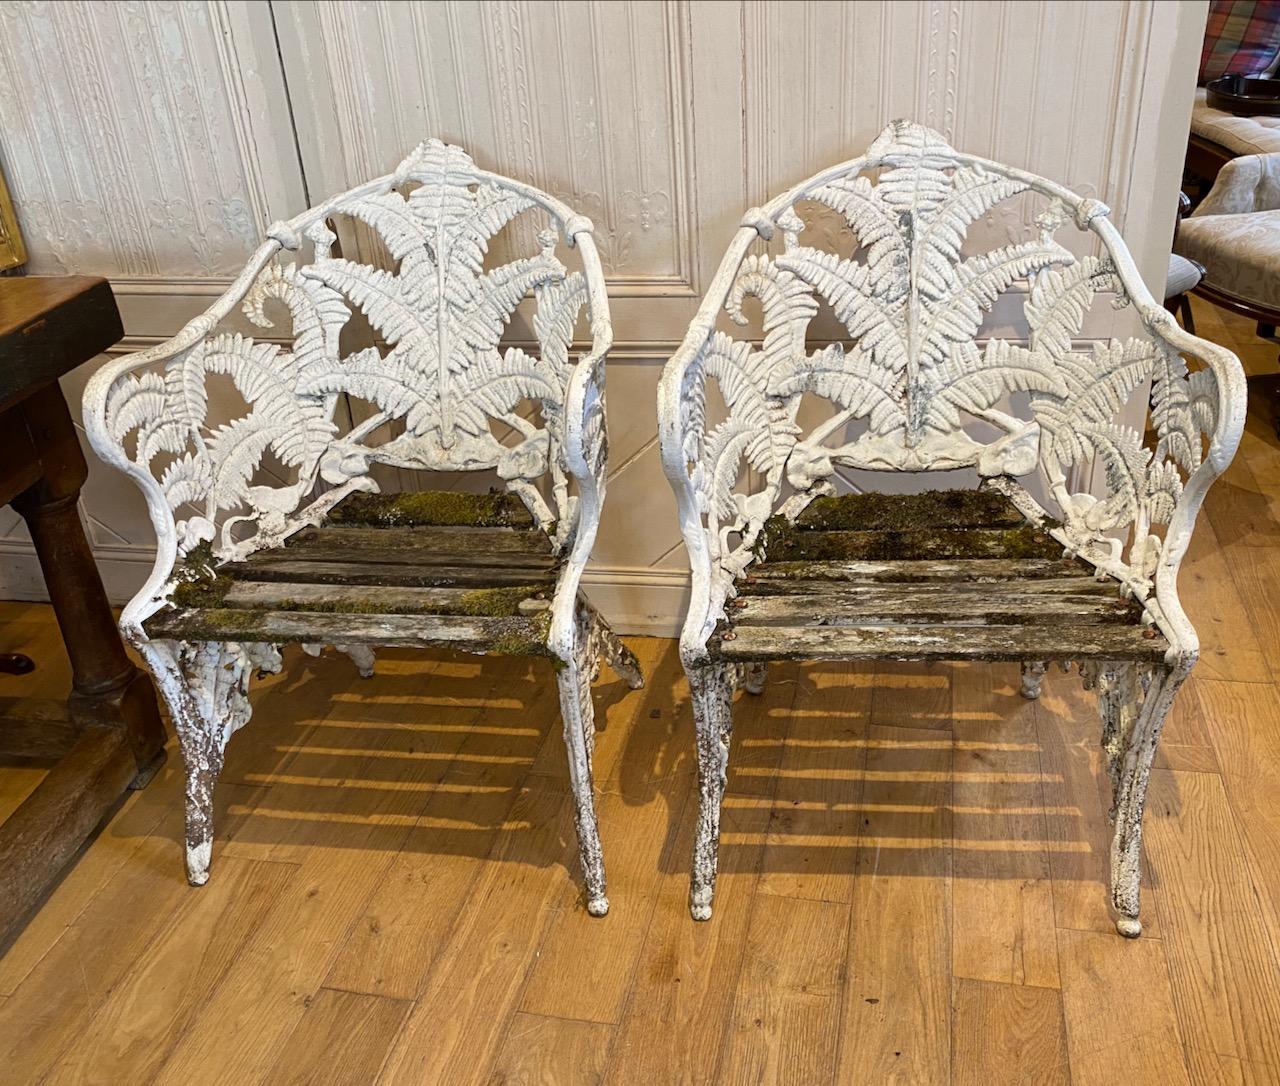 Garden Bench and Pair of Chairs in Coalbrookedale Fern Pattern